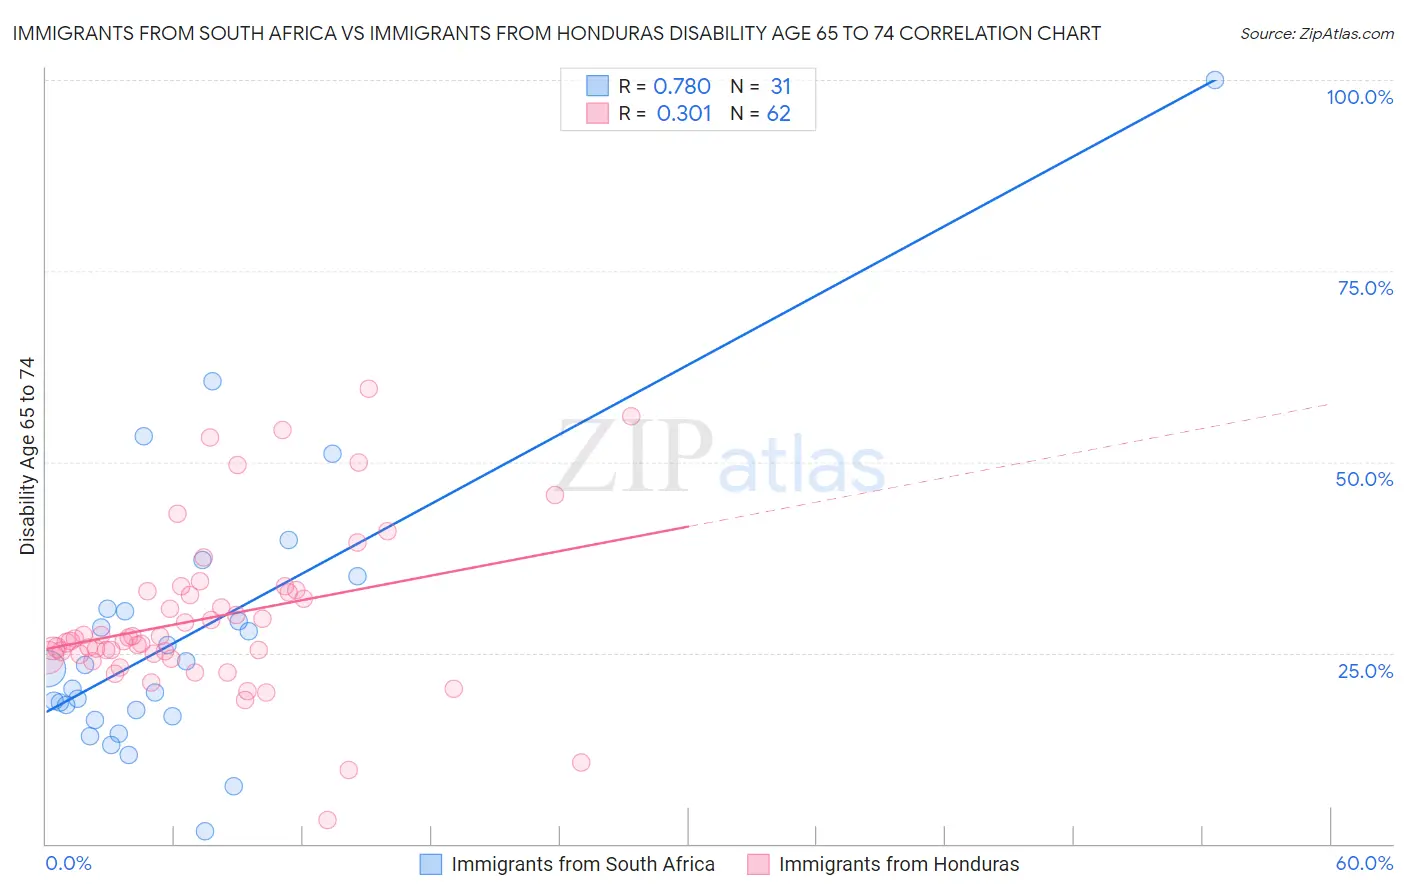 Immigrants from South Africa vs Immigrants from Honduras Disability Age 65 to 74